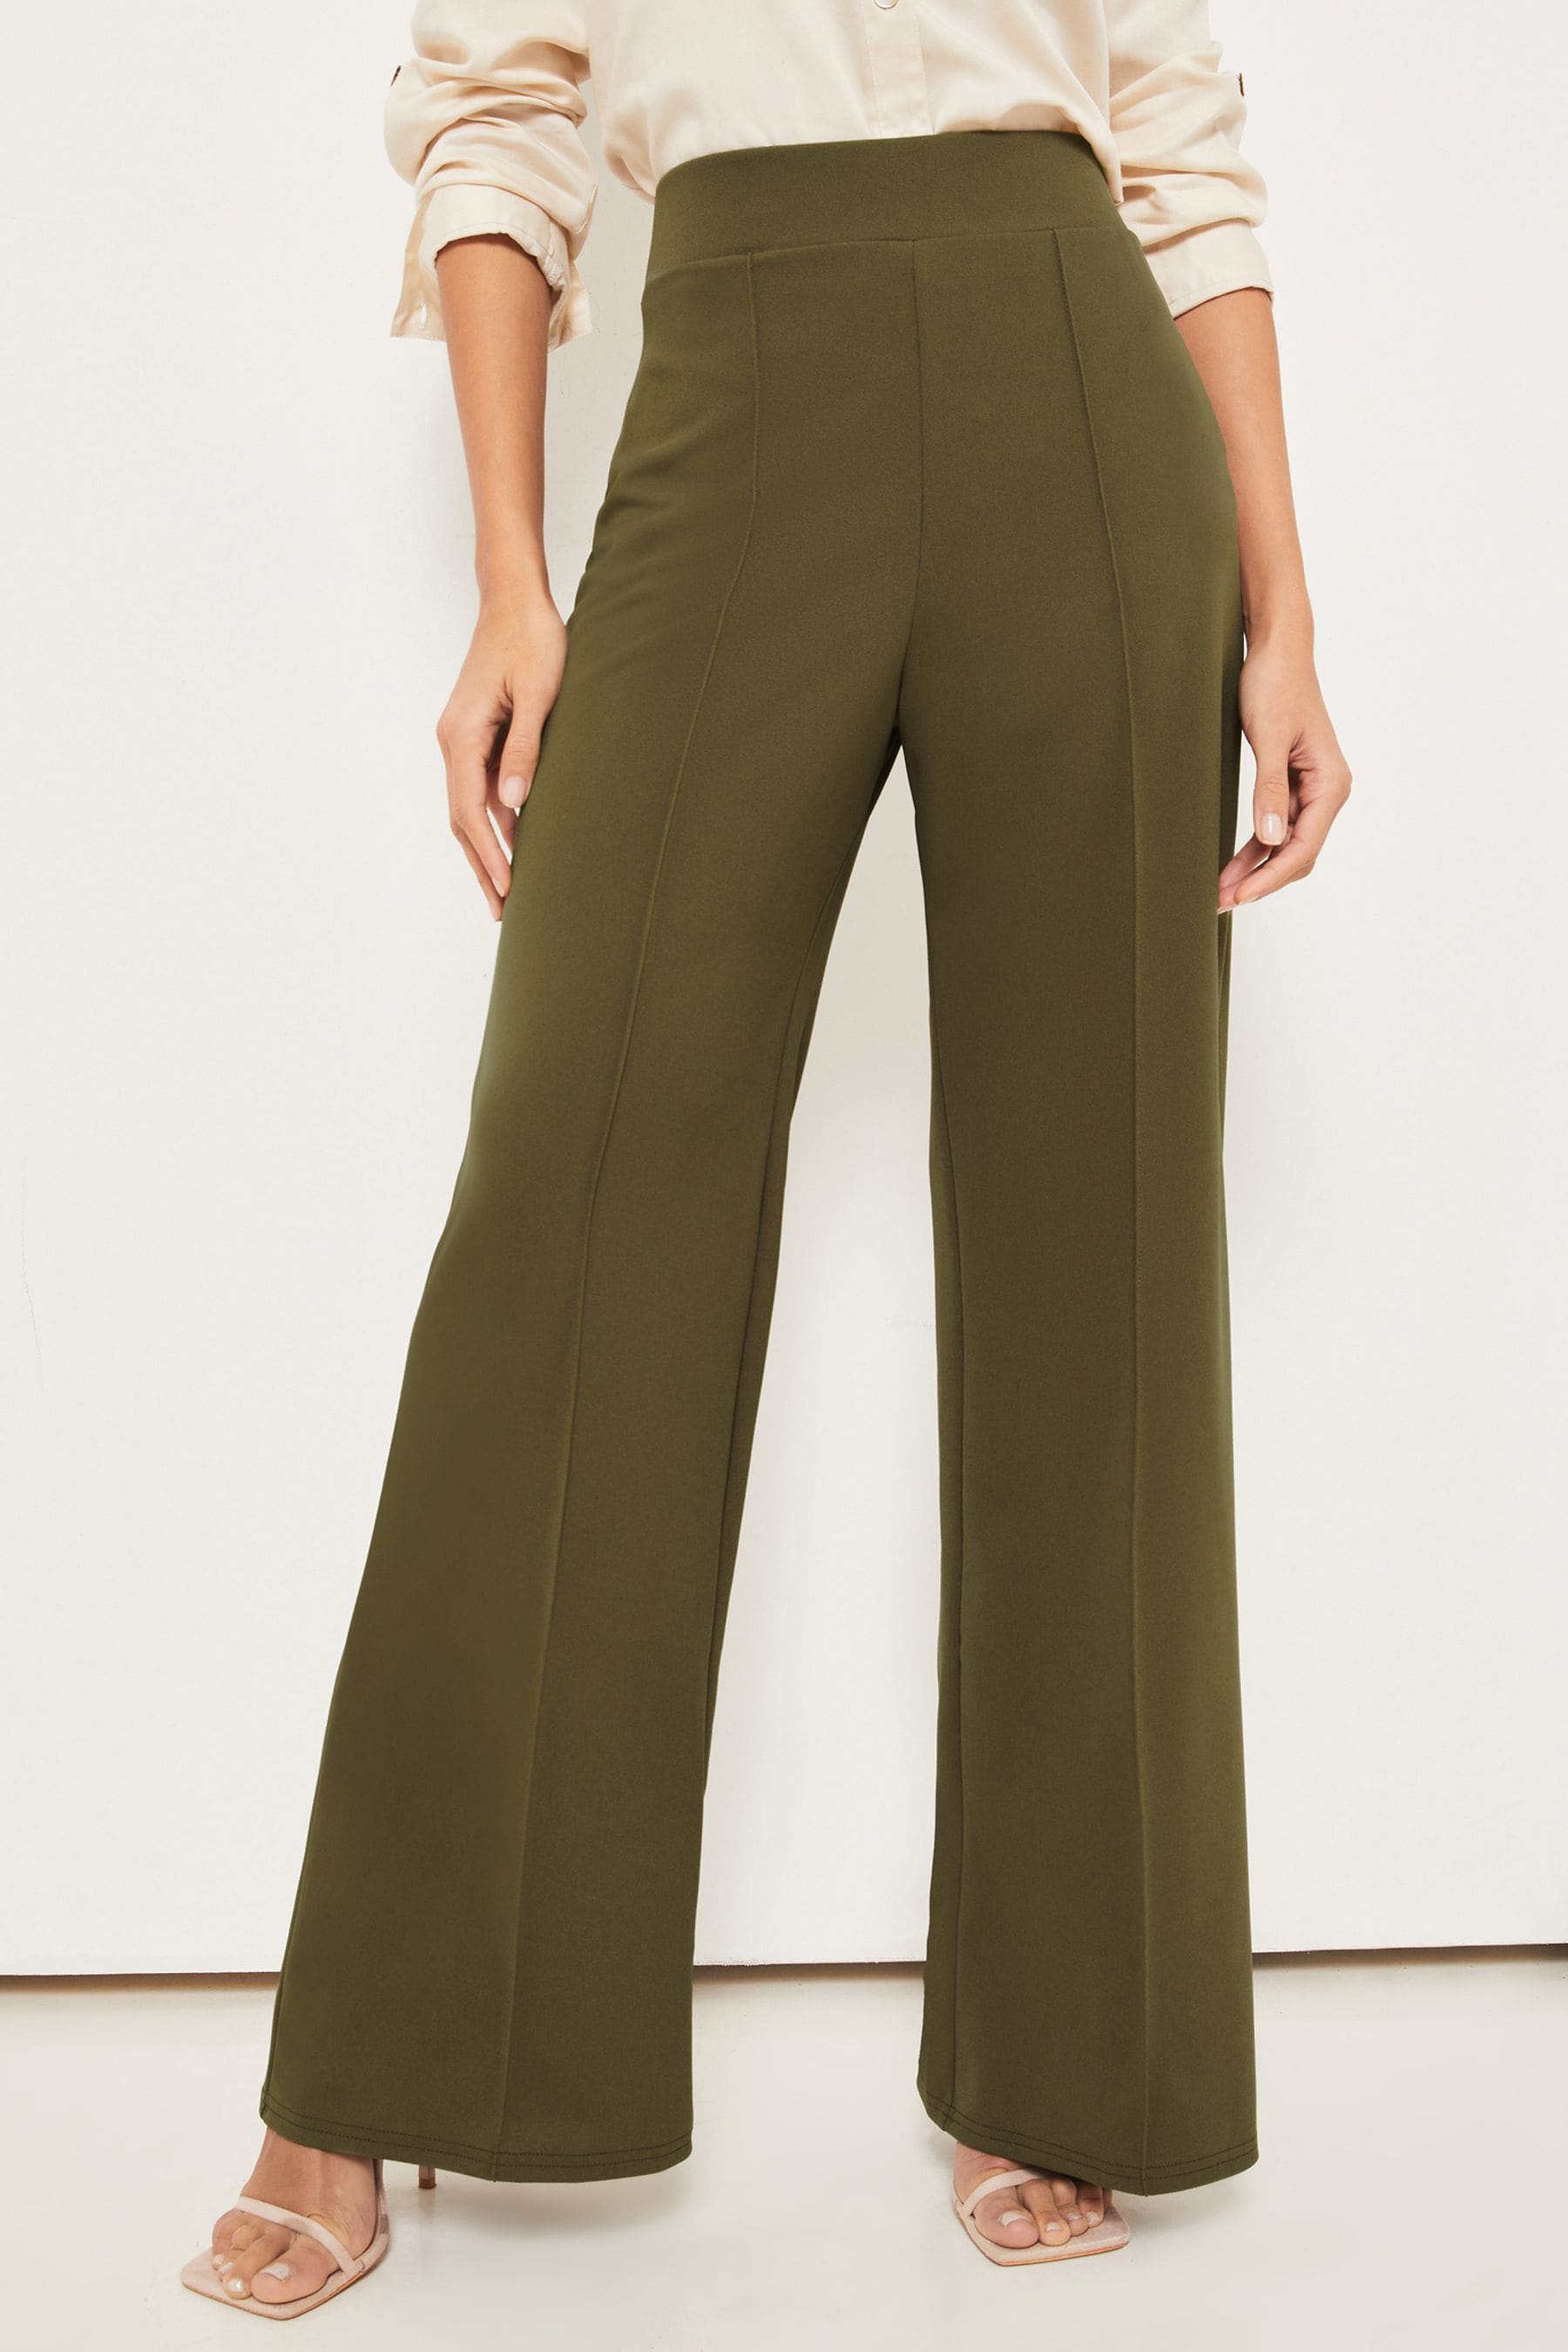 Buy Lipsy Khaki Green High Waist Wide Leg Tailored Trousers from Next ...